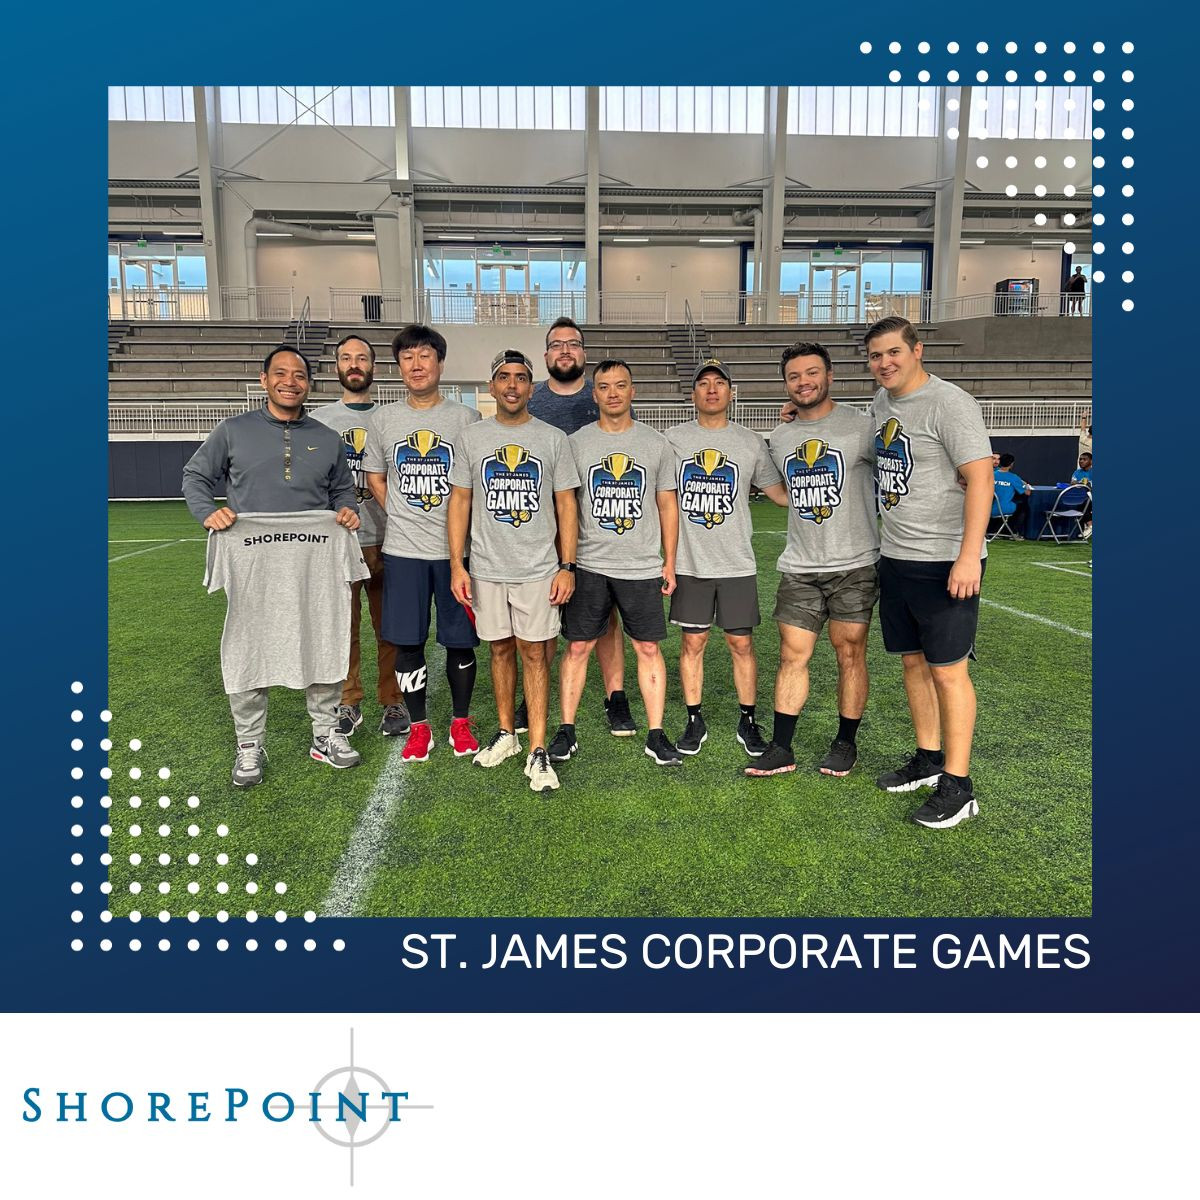 We support the Annual St. James Corporate Games, with a focus on wellness and support of the Capital Area Food Bank.